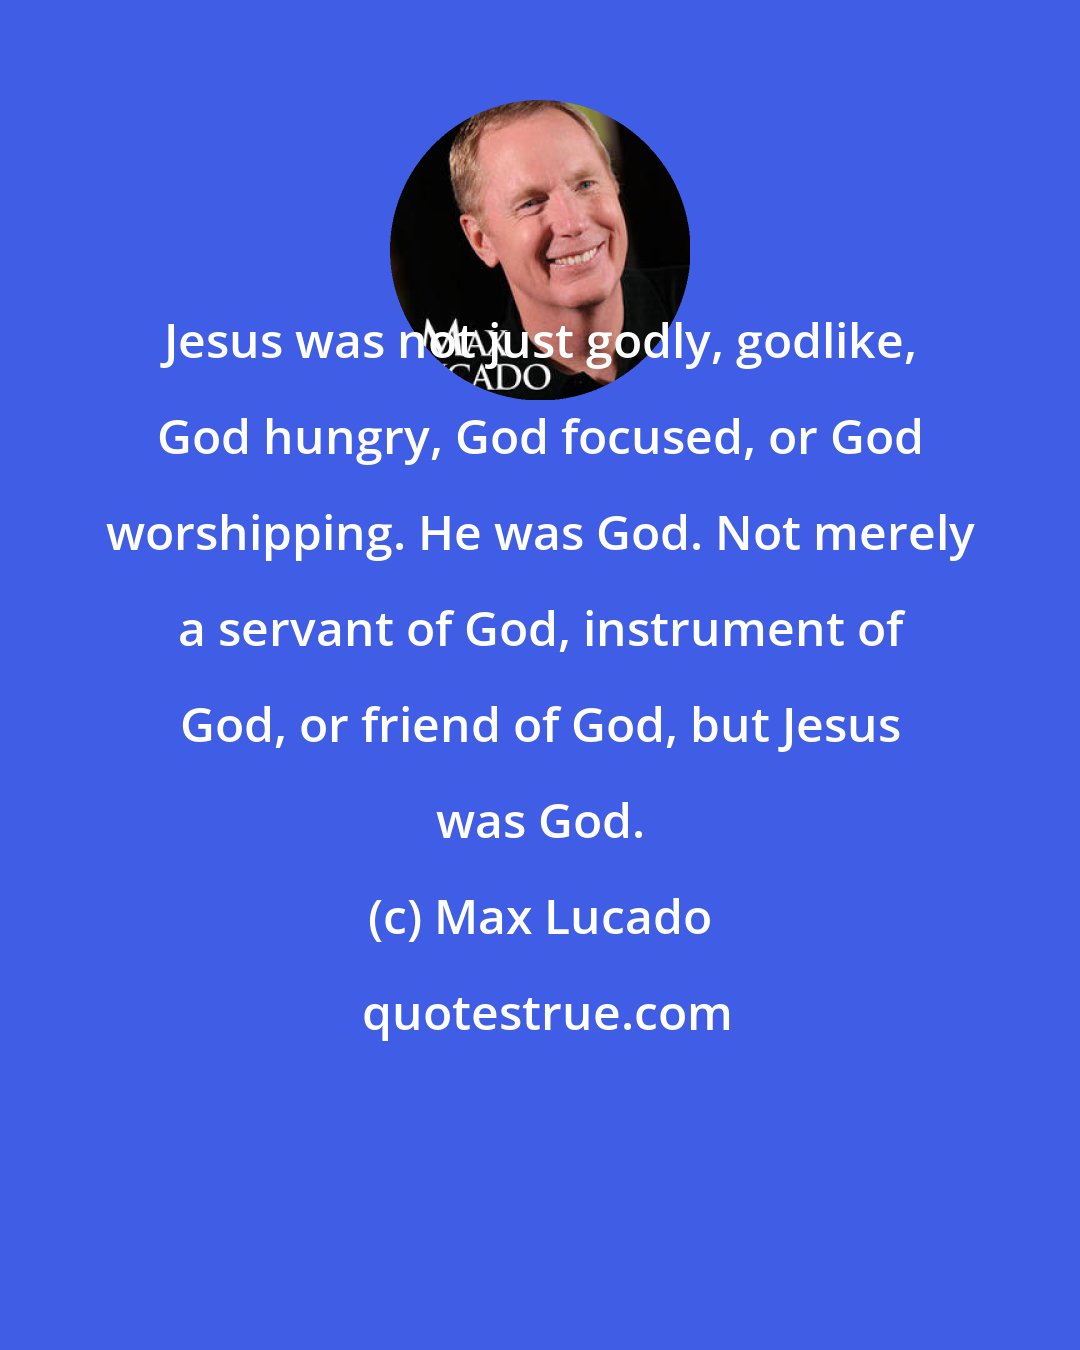 Max Lucado: Jesus was not just godly, godlike, God hungry, God focused, or God worshipping. He was God. Not merely a servant of God, instrument of God, or friend of God, but Jesus was God.